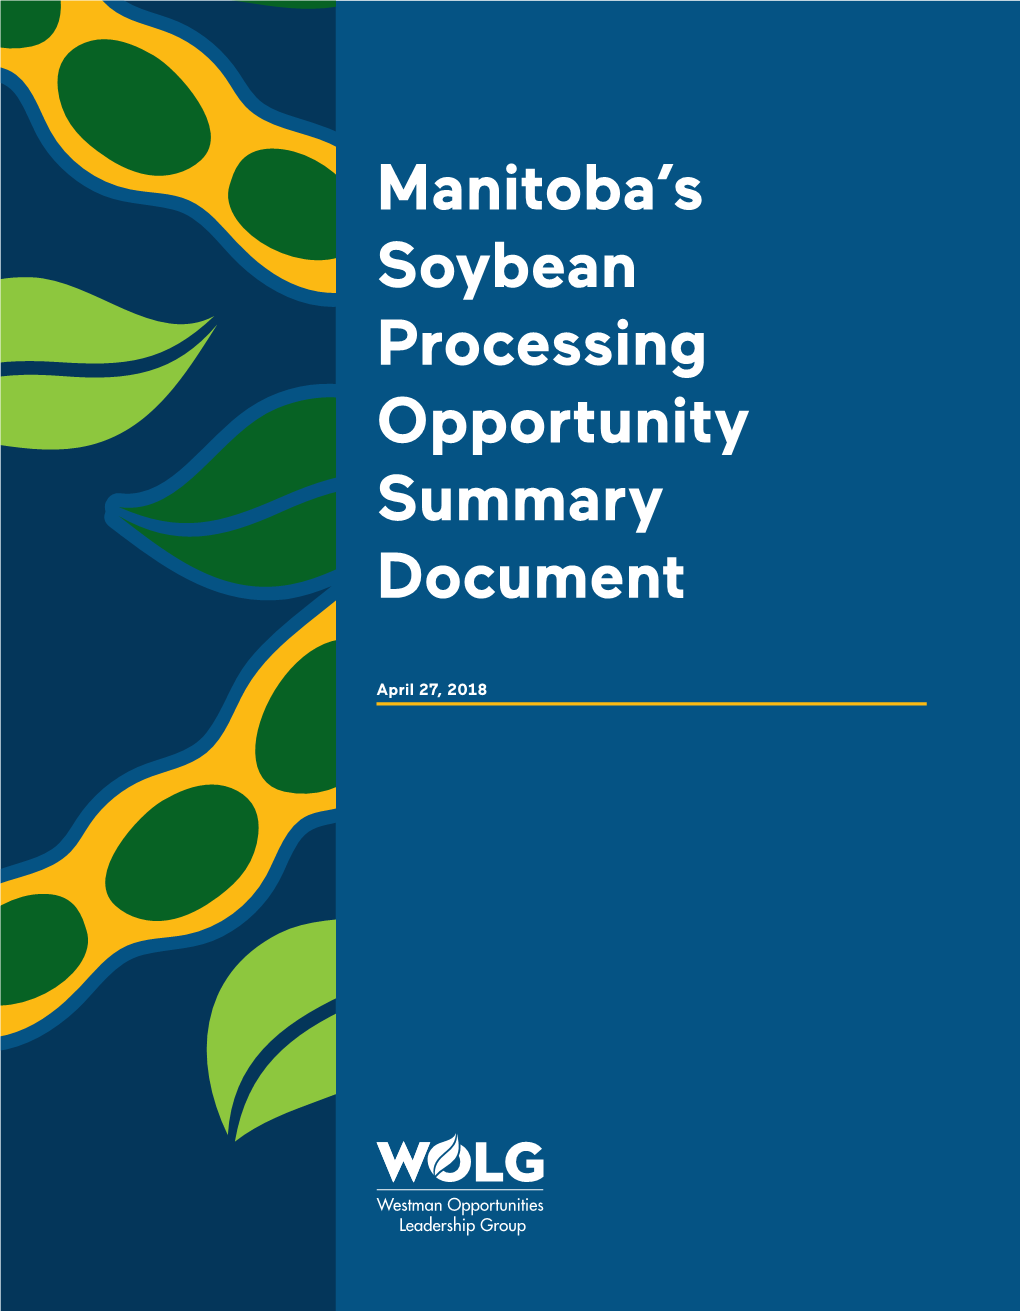 Manitoba's Soybean Processing Opportunity Summary Document